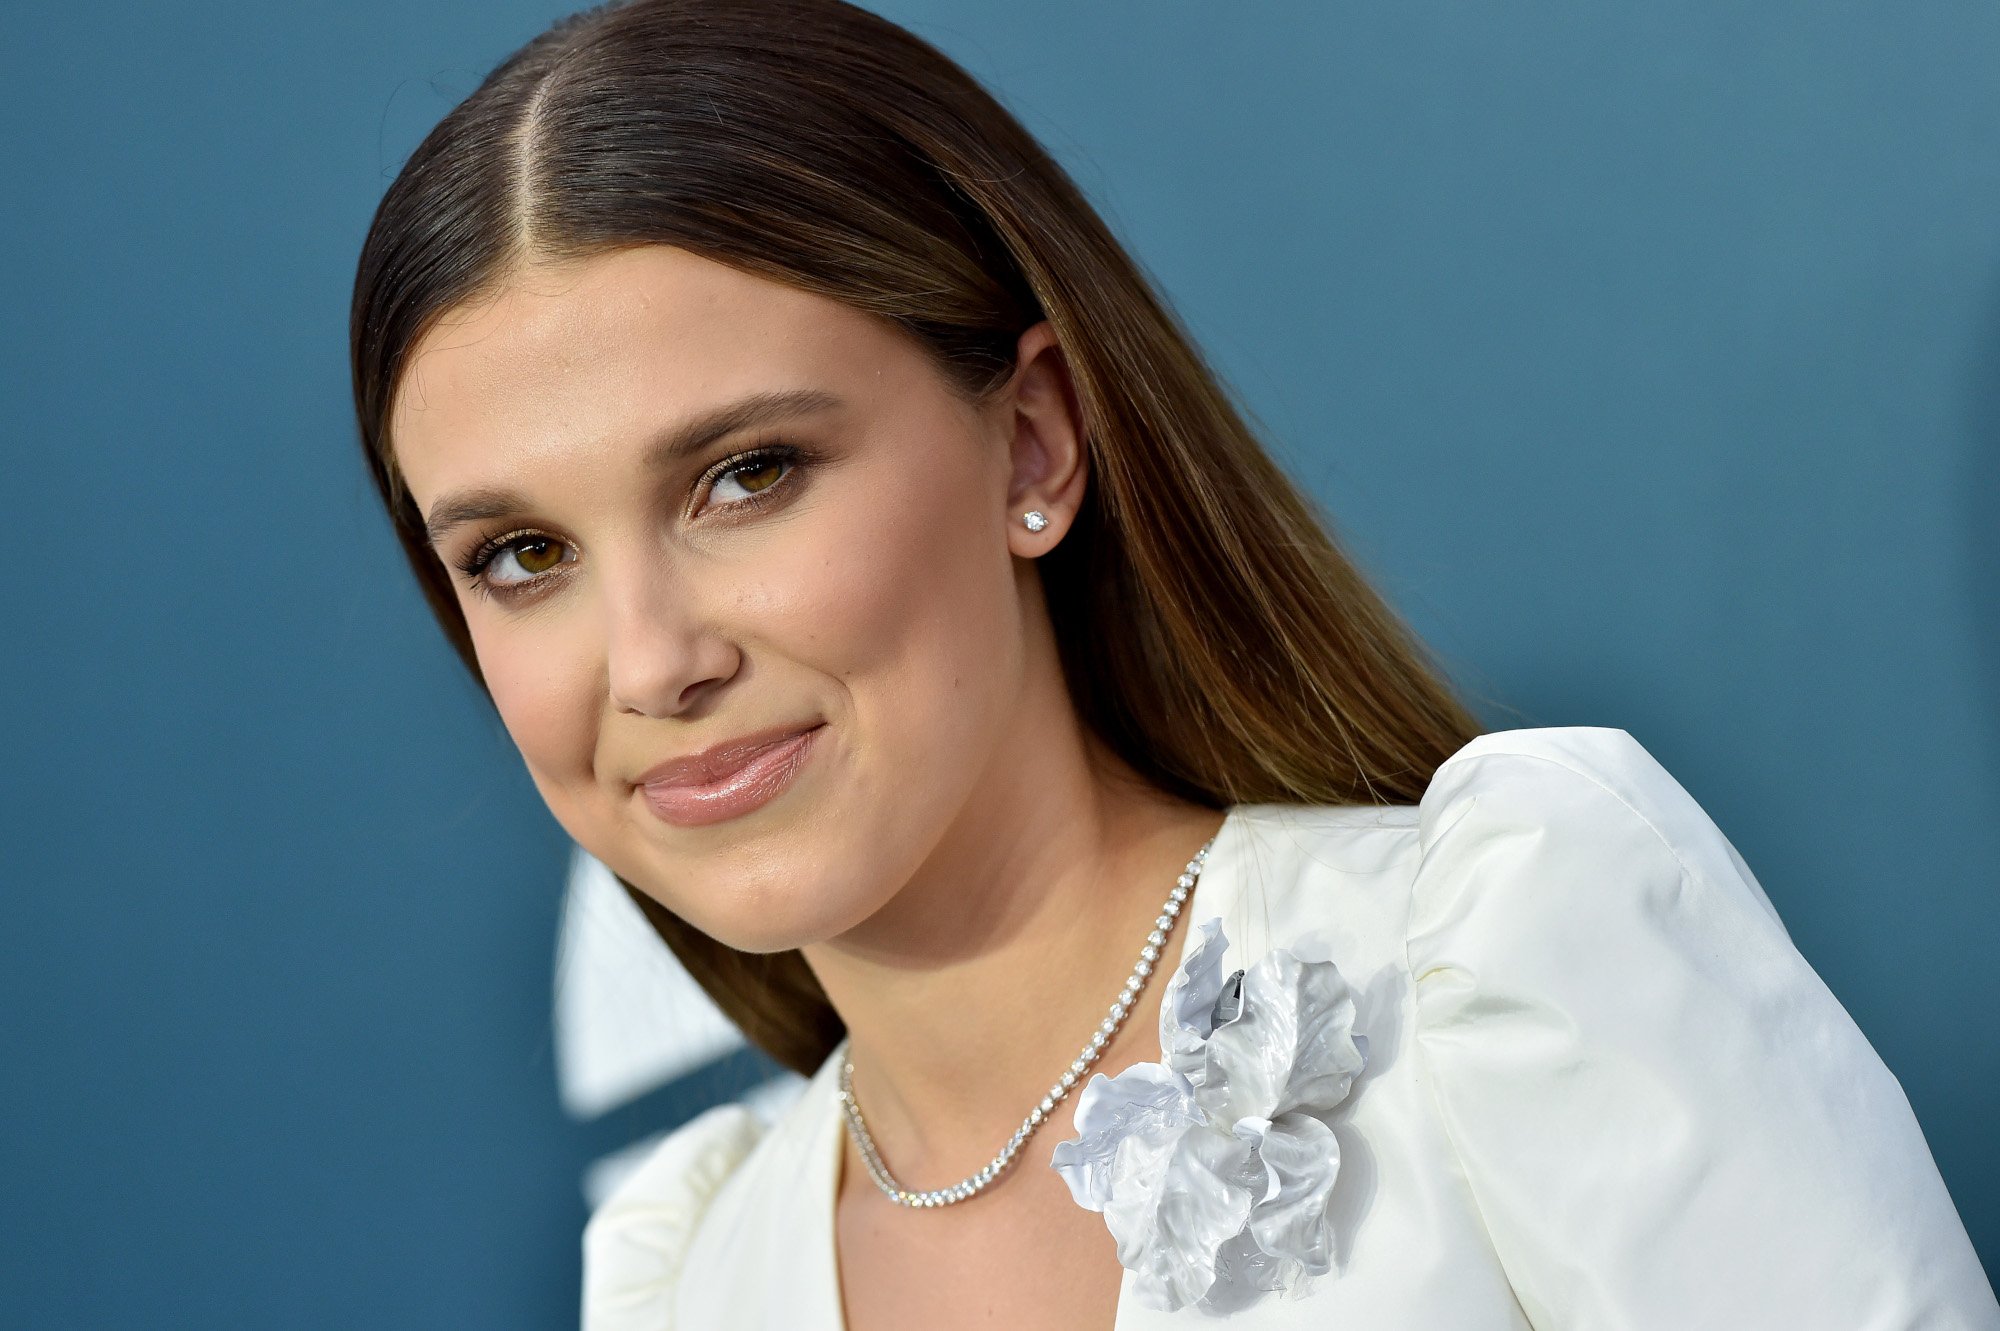 Millie Bobby Brown, who is rumored to be in talks for a 'Star Wars' movie or show. She's wearing a white dress, her hair is brown and straight, and she's smiling.